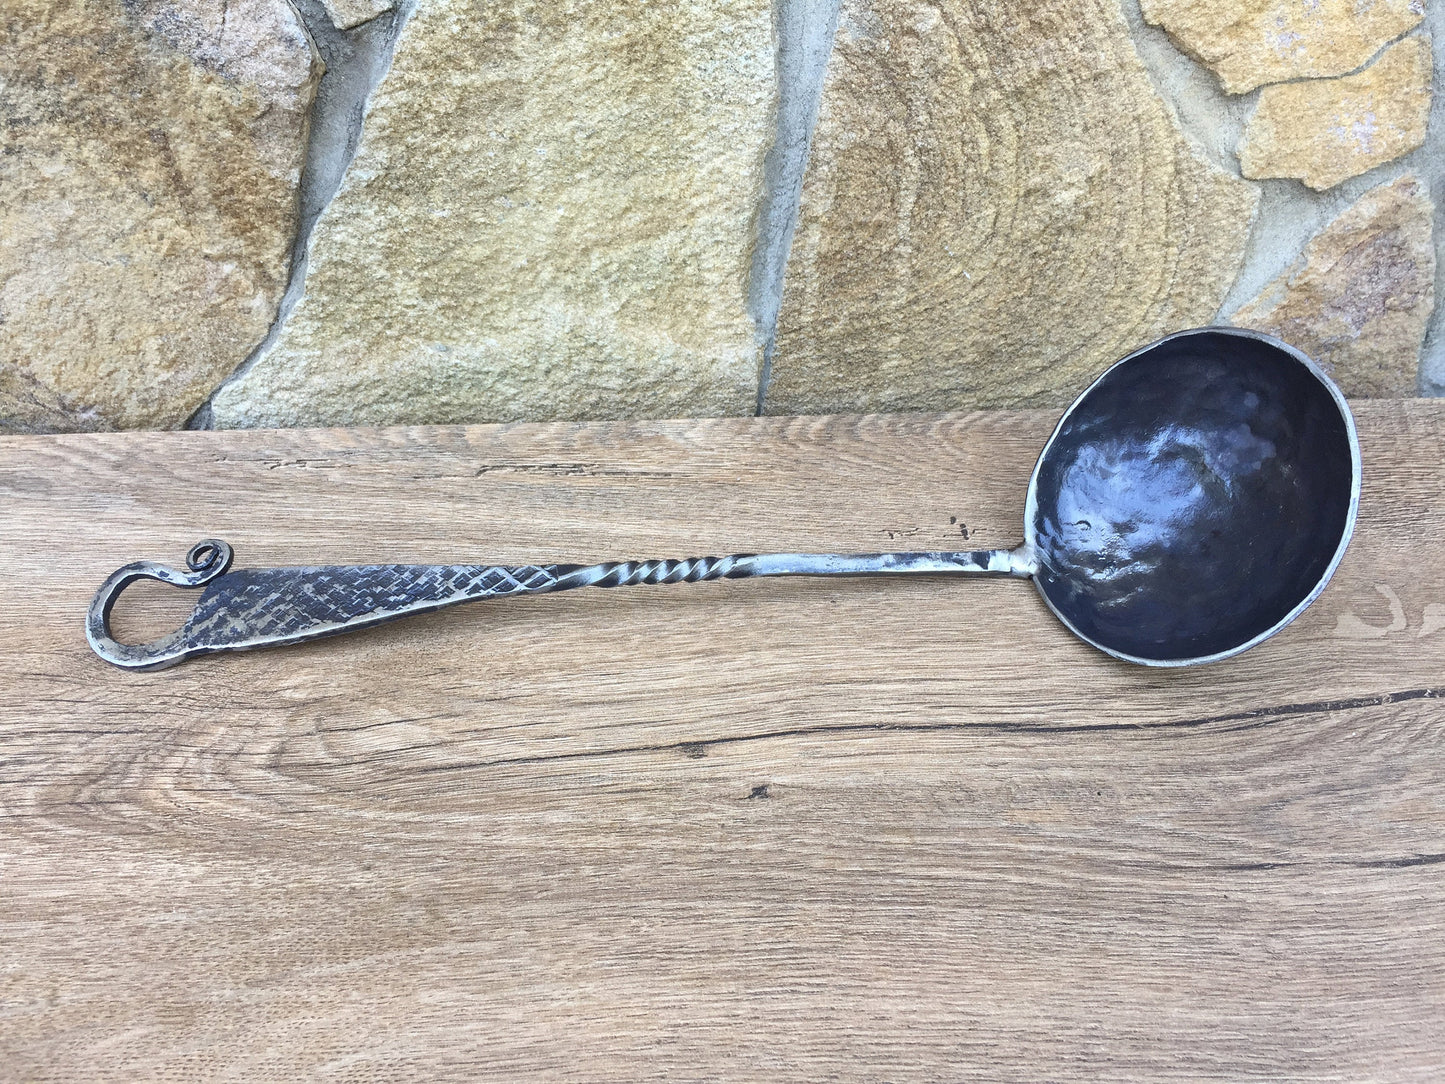 Medieval cutlery, ladle, ladle water dipper, spatula, fork, spoon, middle ages cutlery, camp equipment, serving utensils, kitchen utensils